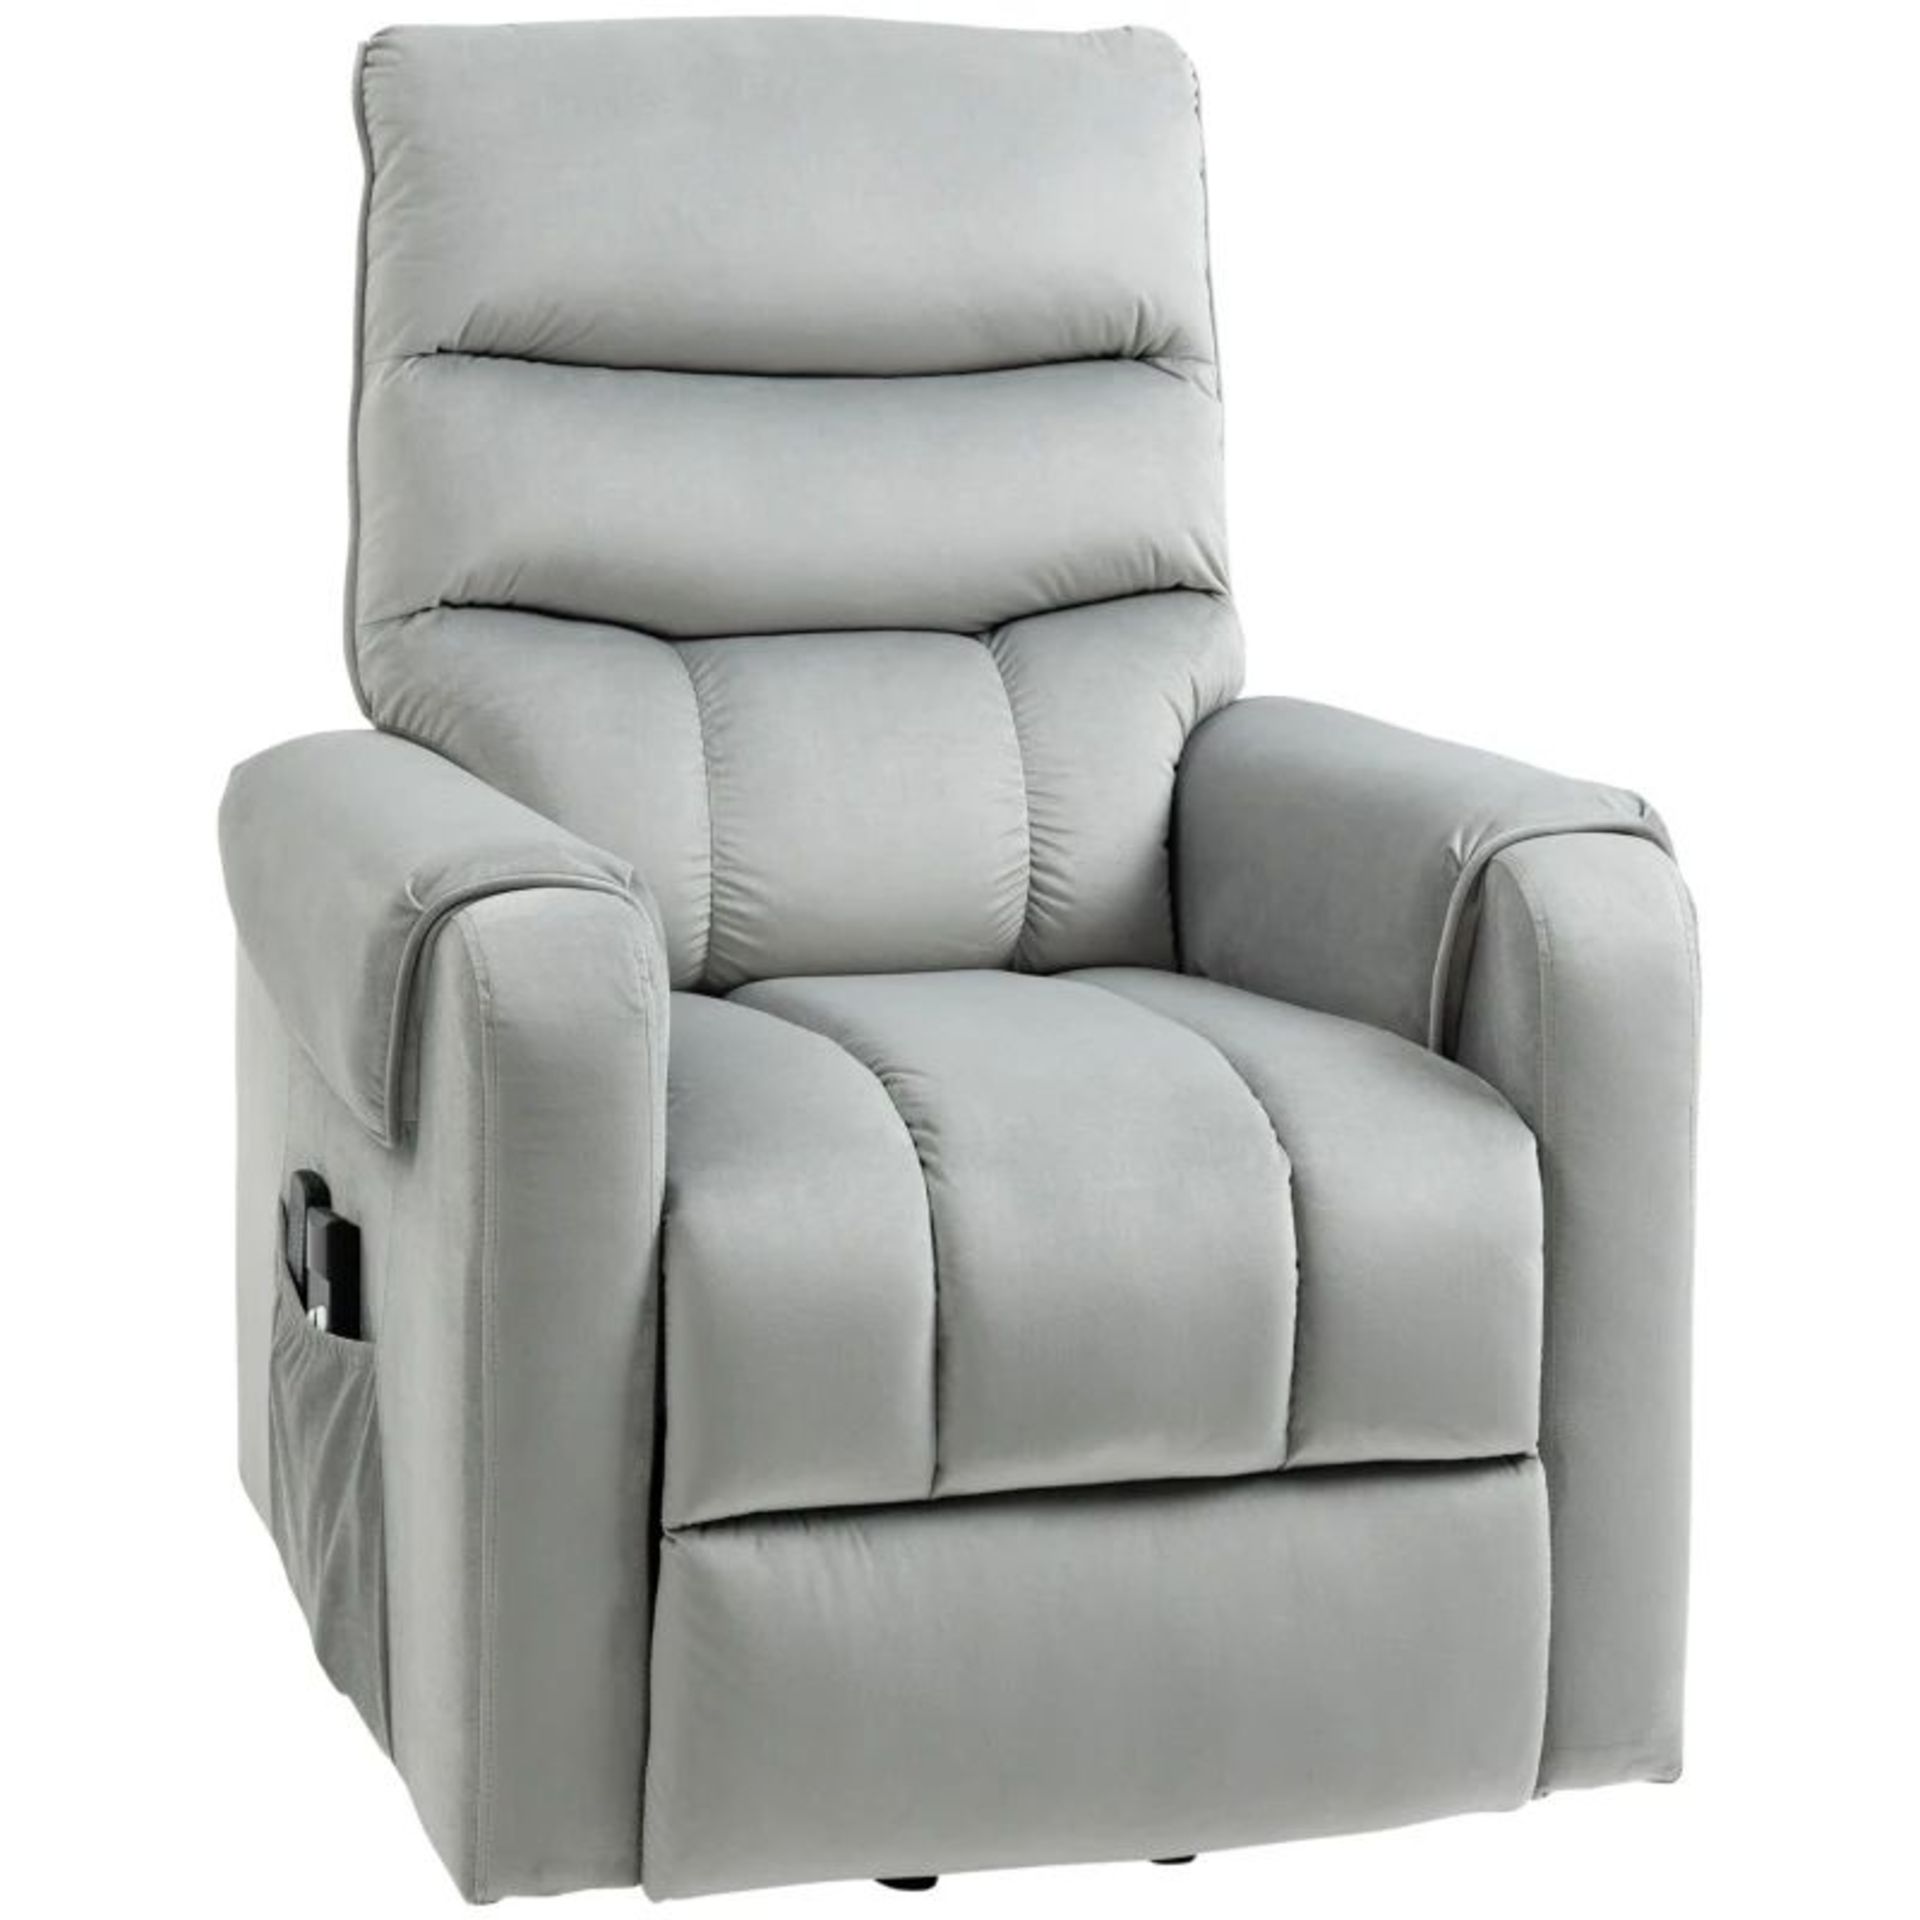 HOMCOM Vibration Massage Rise and Recliner Chair, Electric Power Lift Recliner with Remote Control - Image 2 of 2